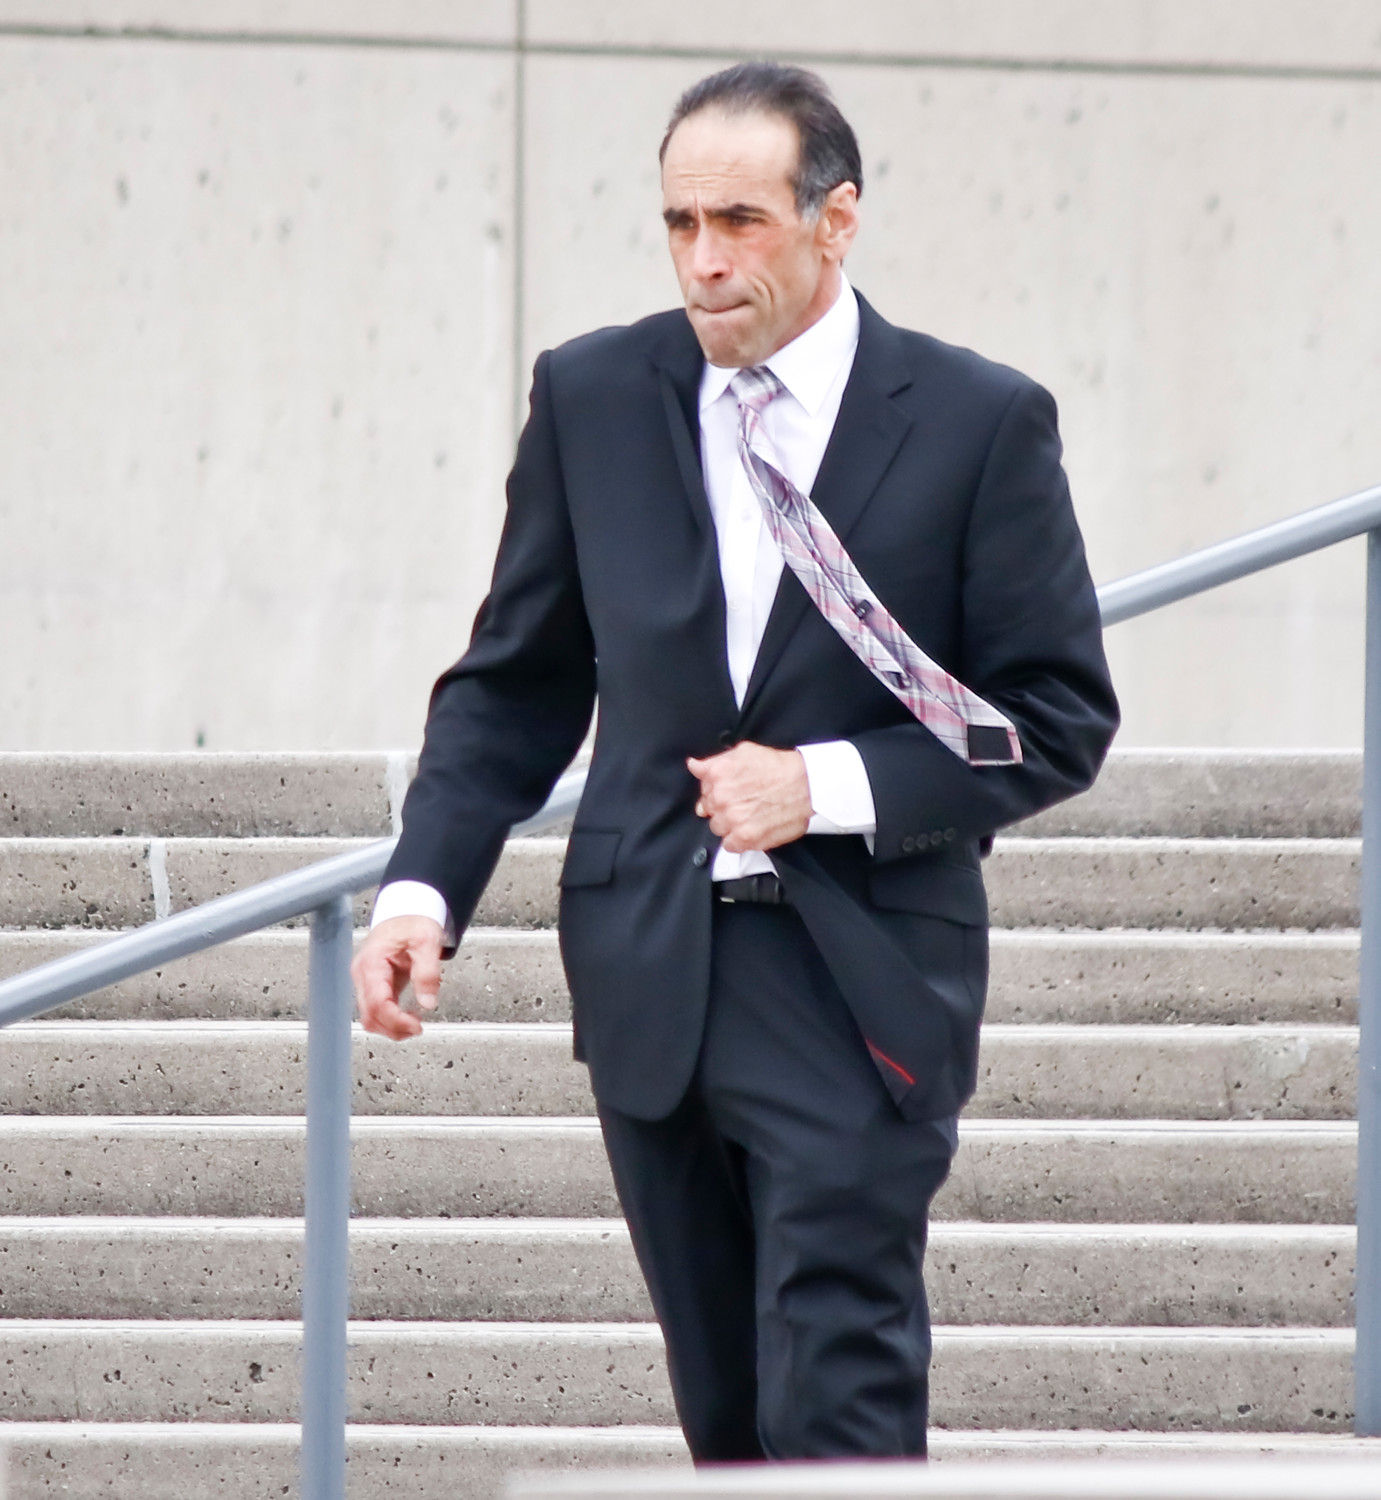 Dr. Michael Belfiore walked out of U.S. District Court in Central Islip on Tuesday. He is on trial for allegedly overprescribing opioids and causing the overdose deaths of two men, and was implicated, but not charged, in the death of another.